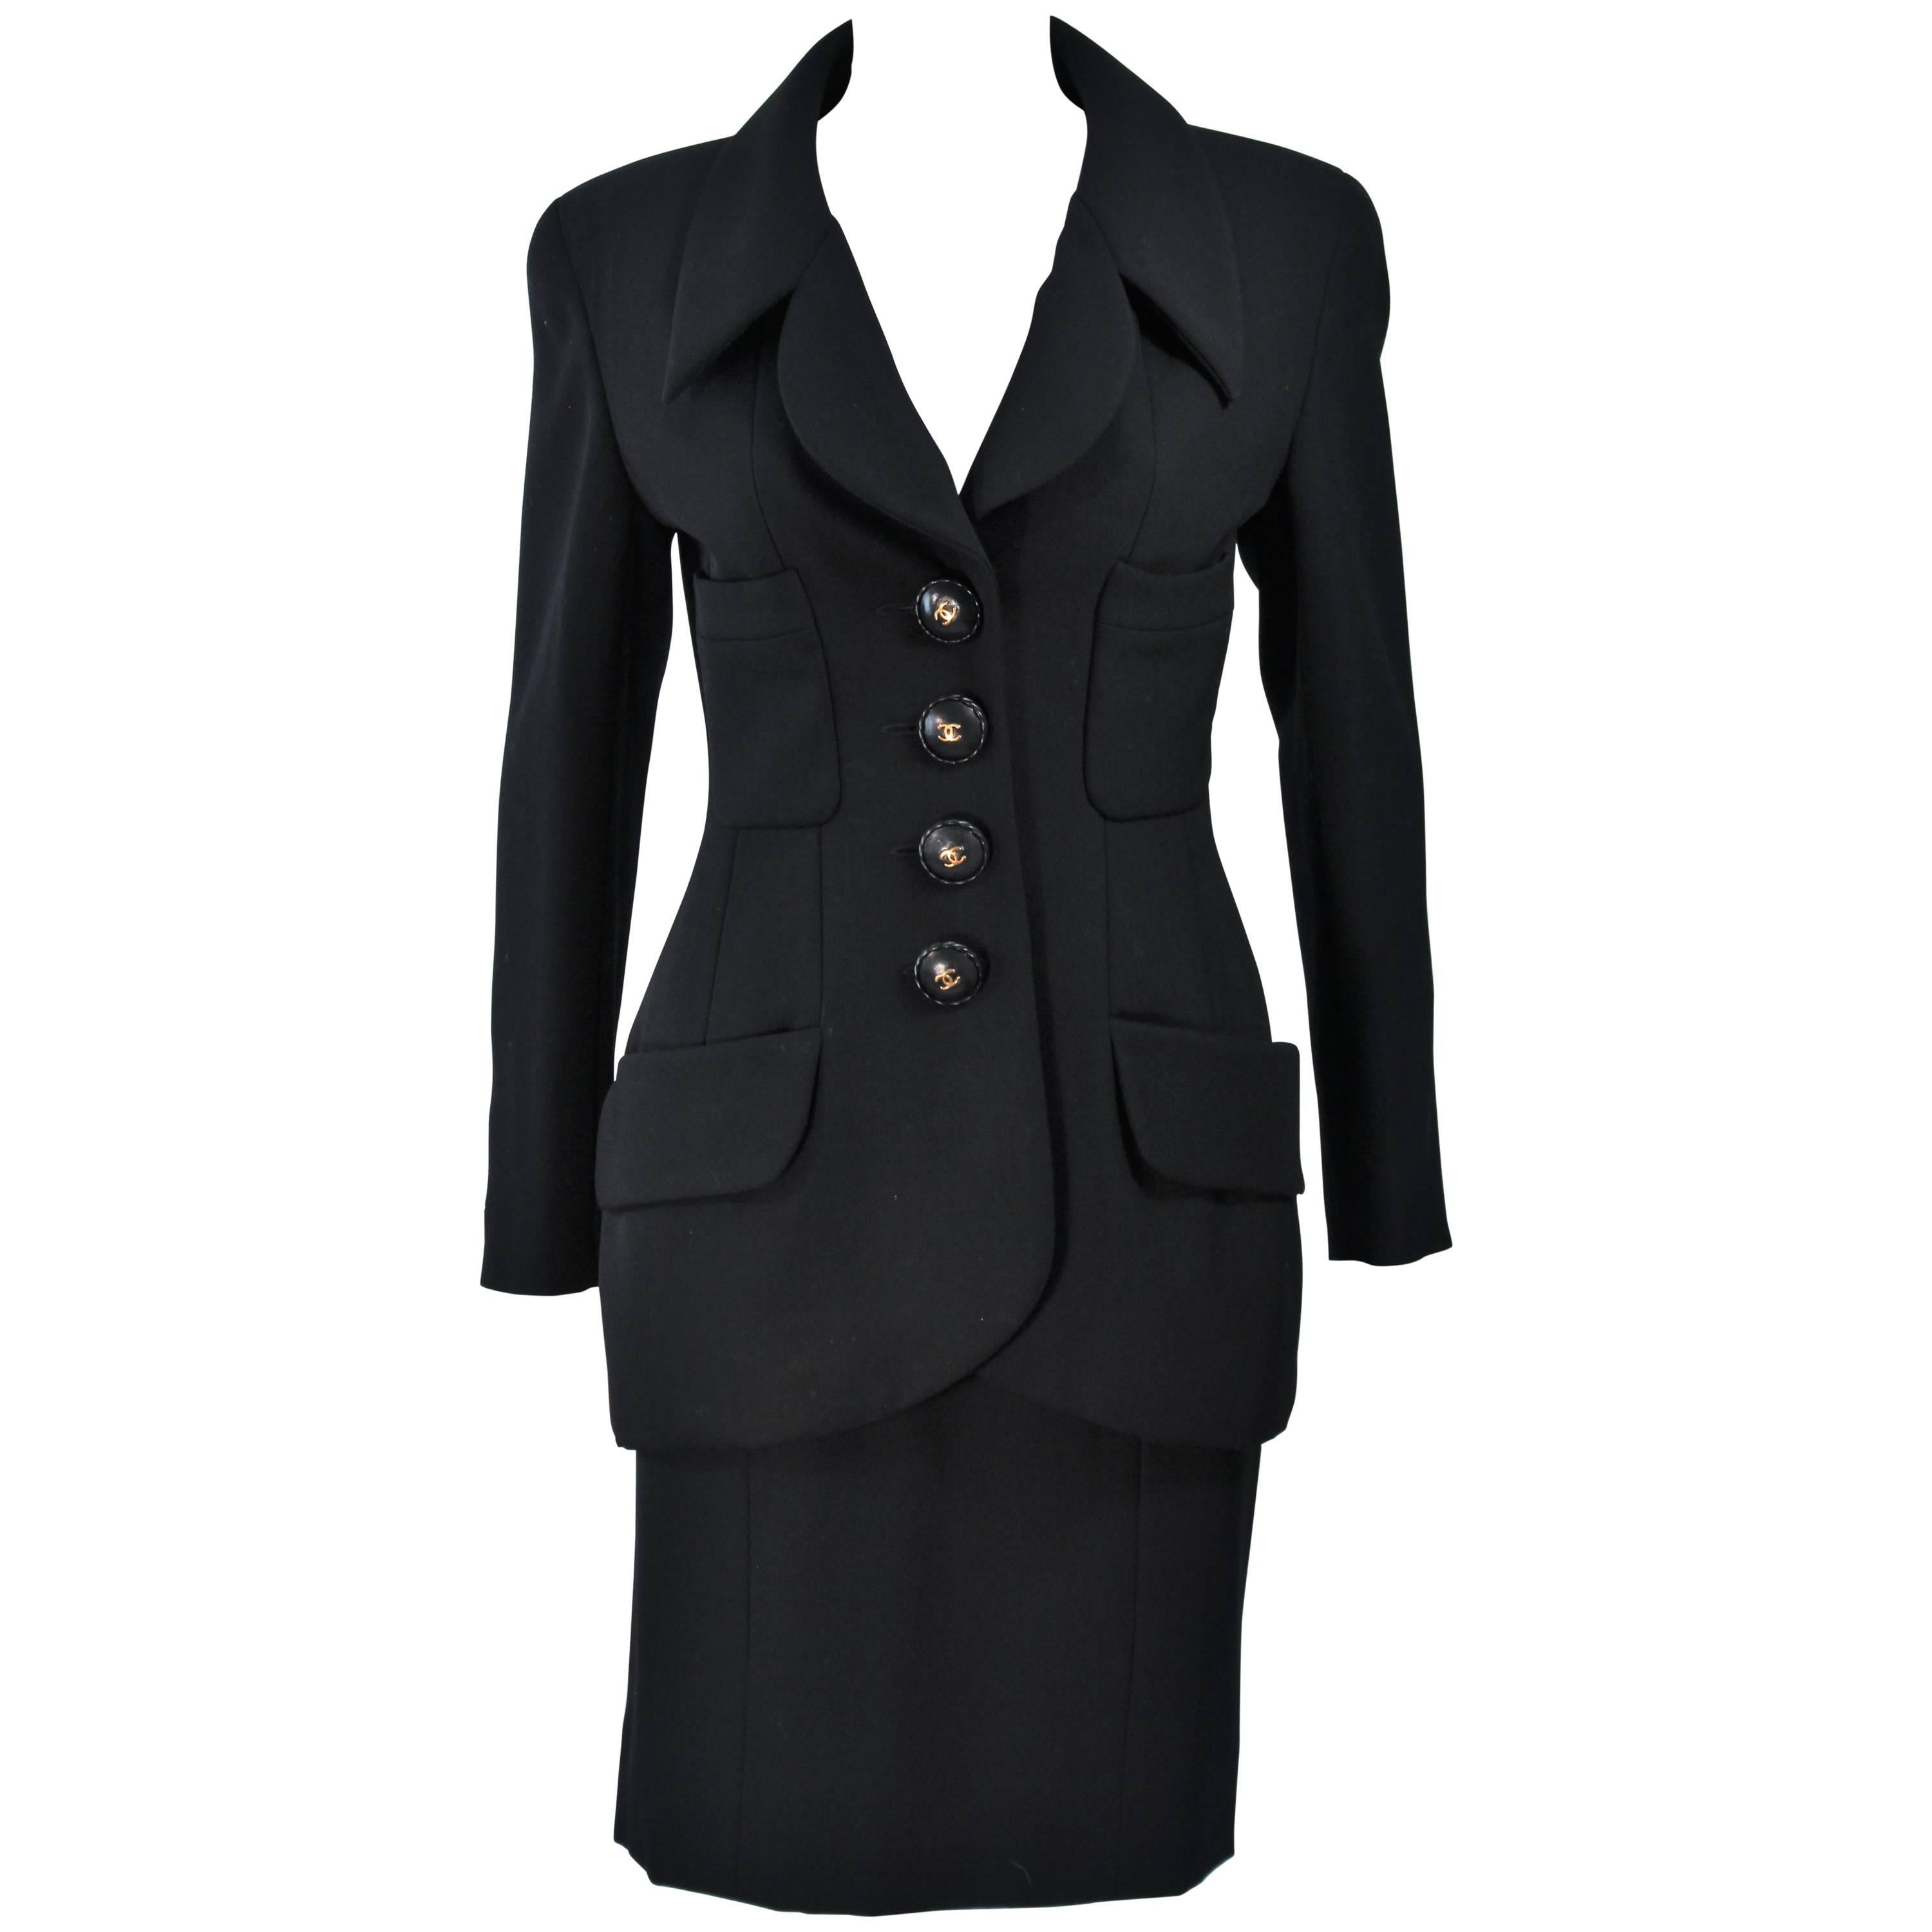 CHANEL BLACK WOOL BUTTON SKIRT SUIT With GOLD HARDWARE SIZE 38